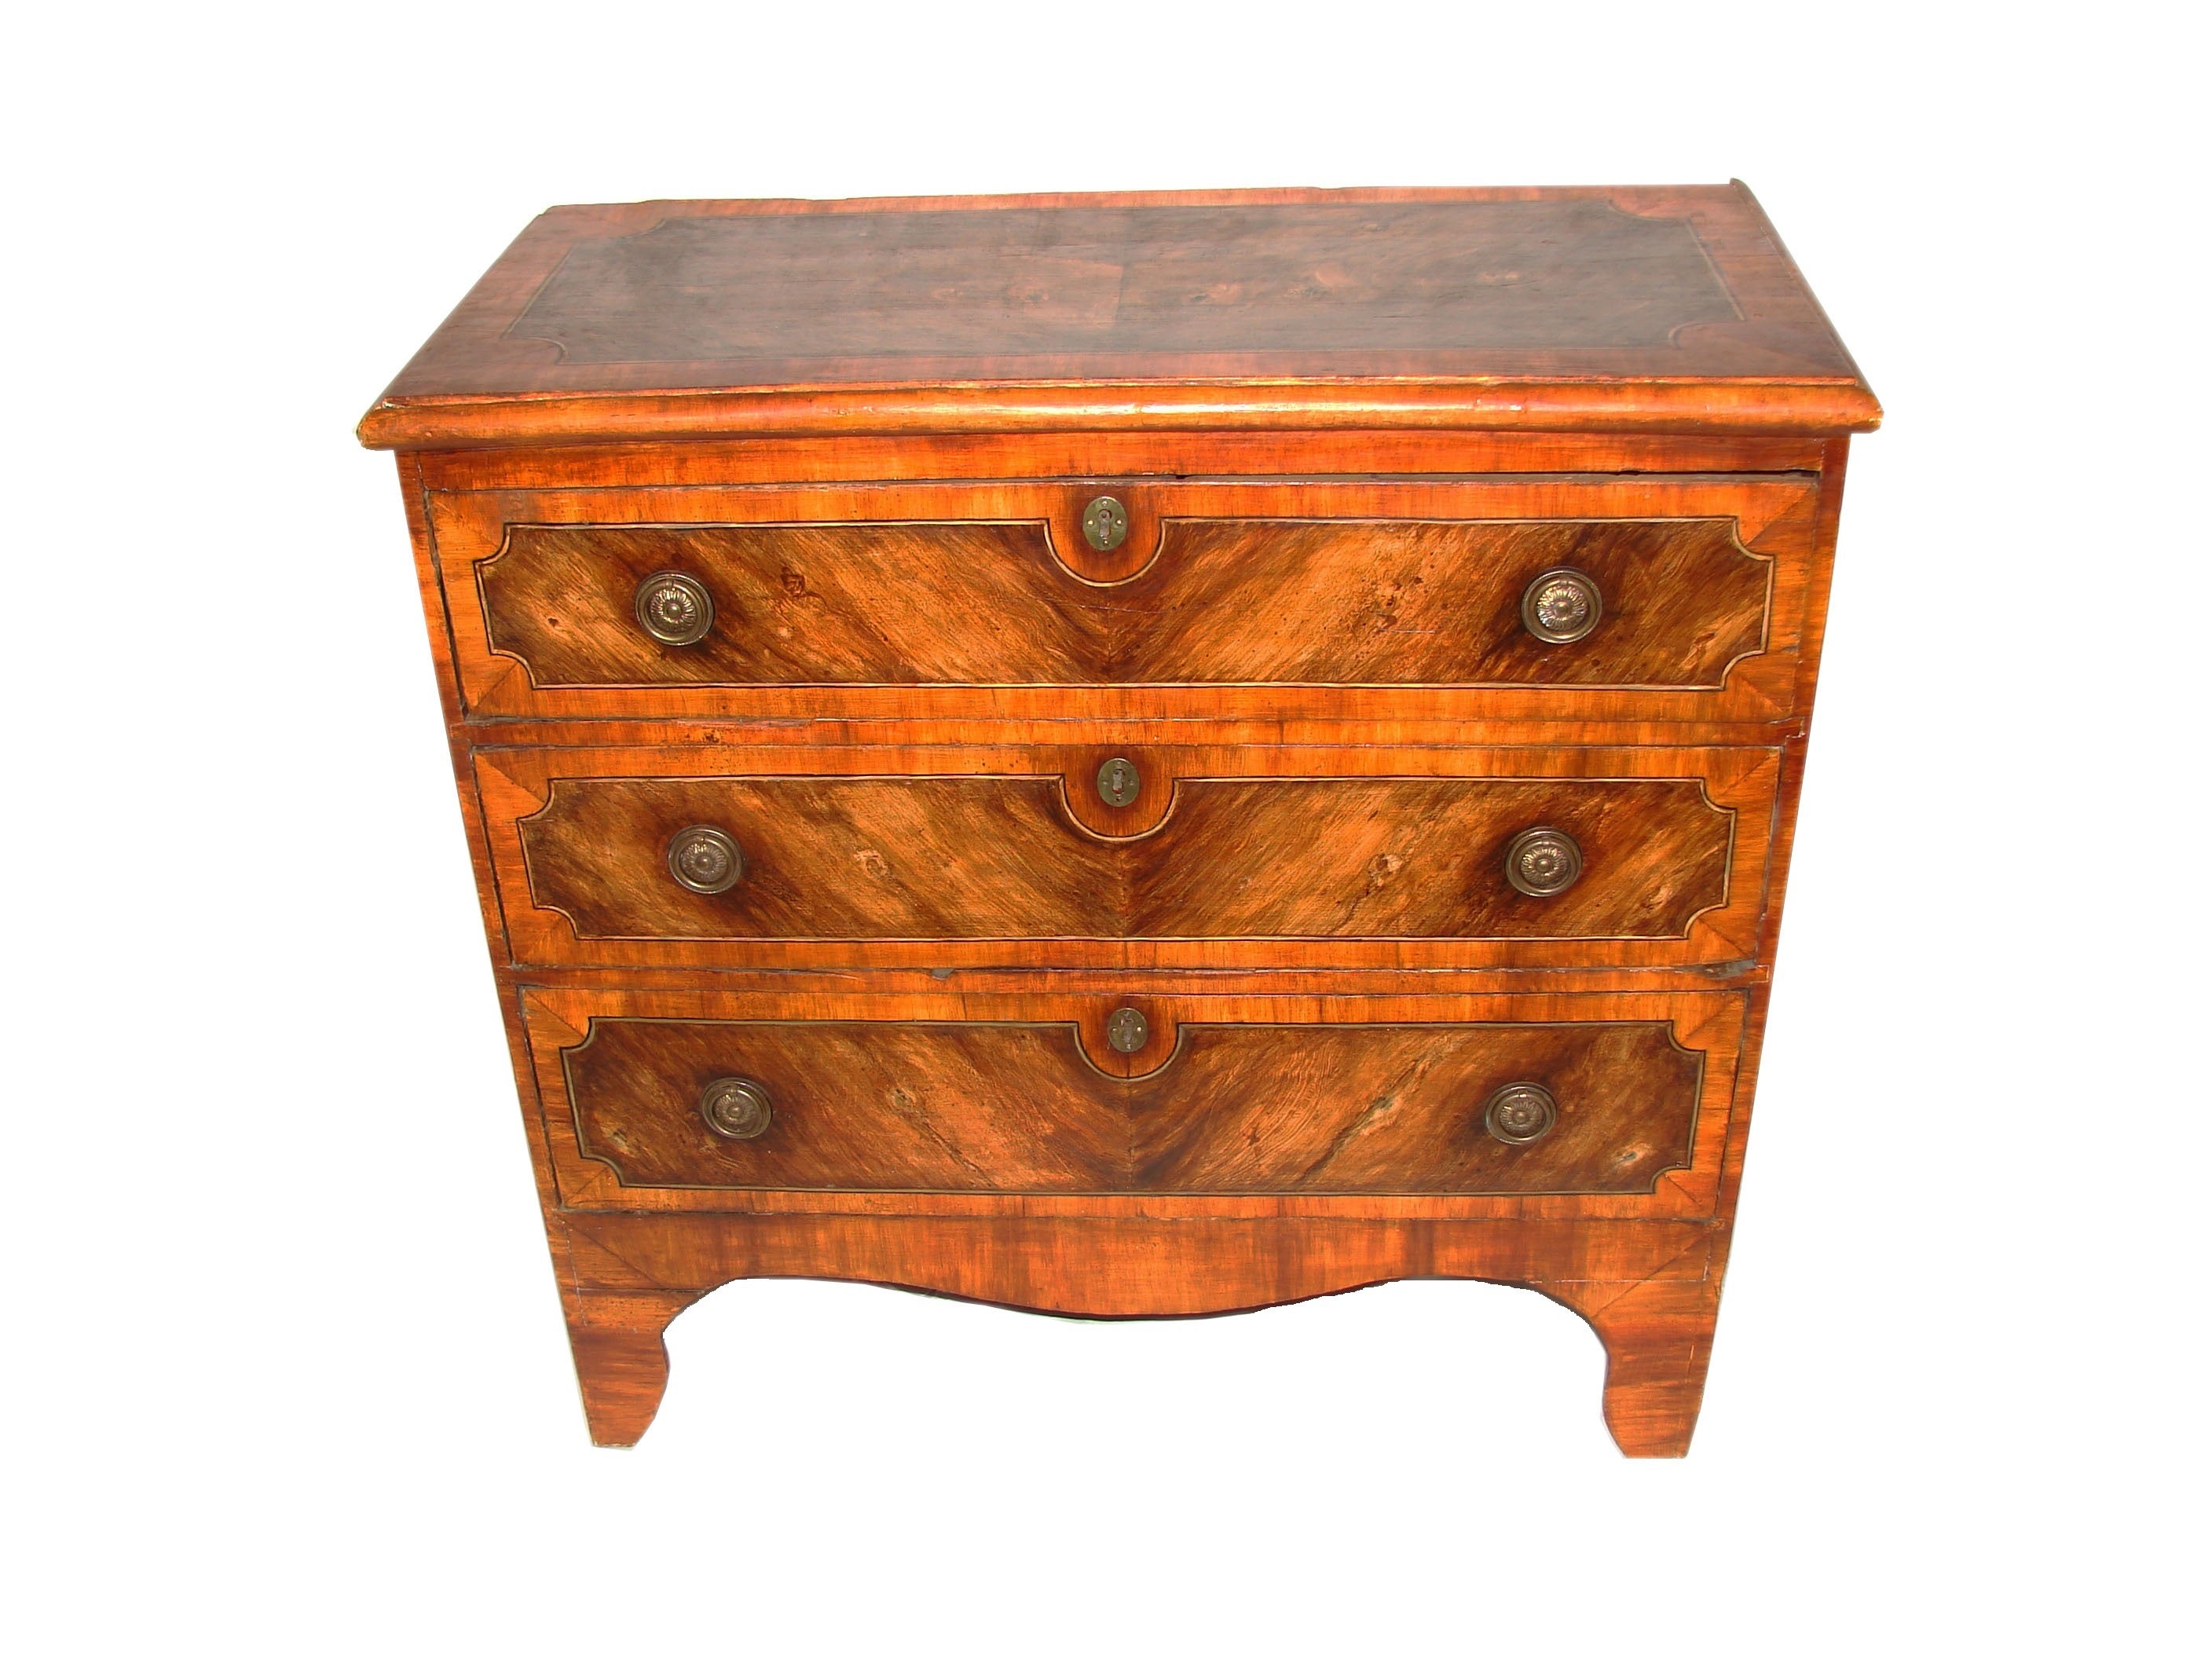 19th Century Italian Painted Faux Bois Chest of Drawers